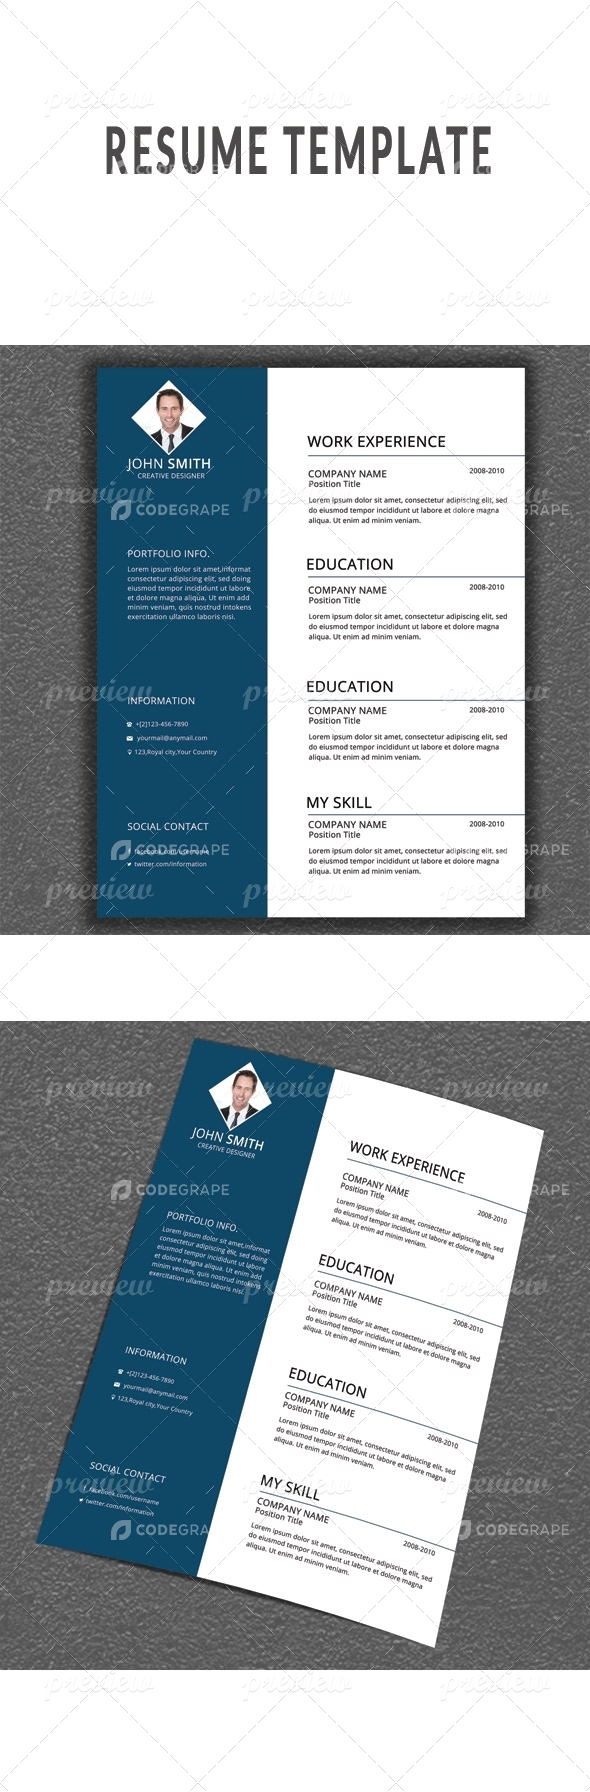 Personal Resume Template